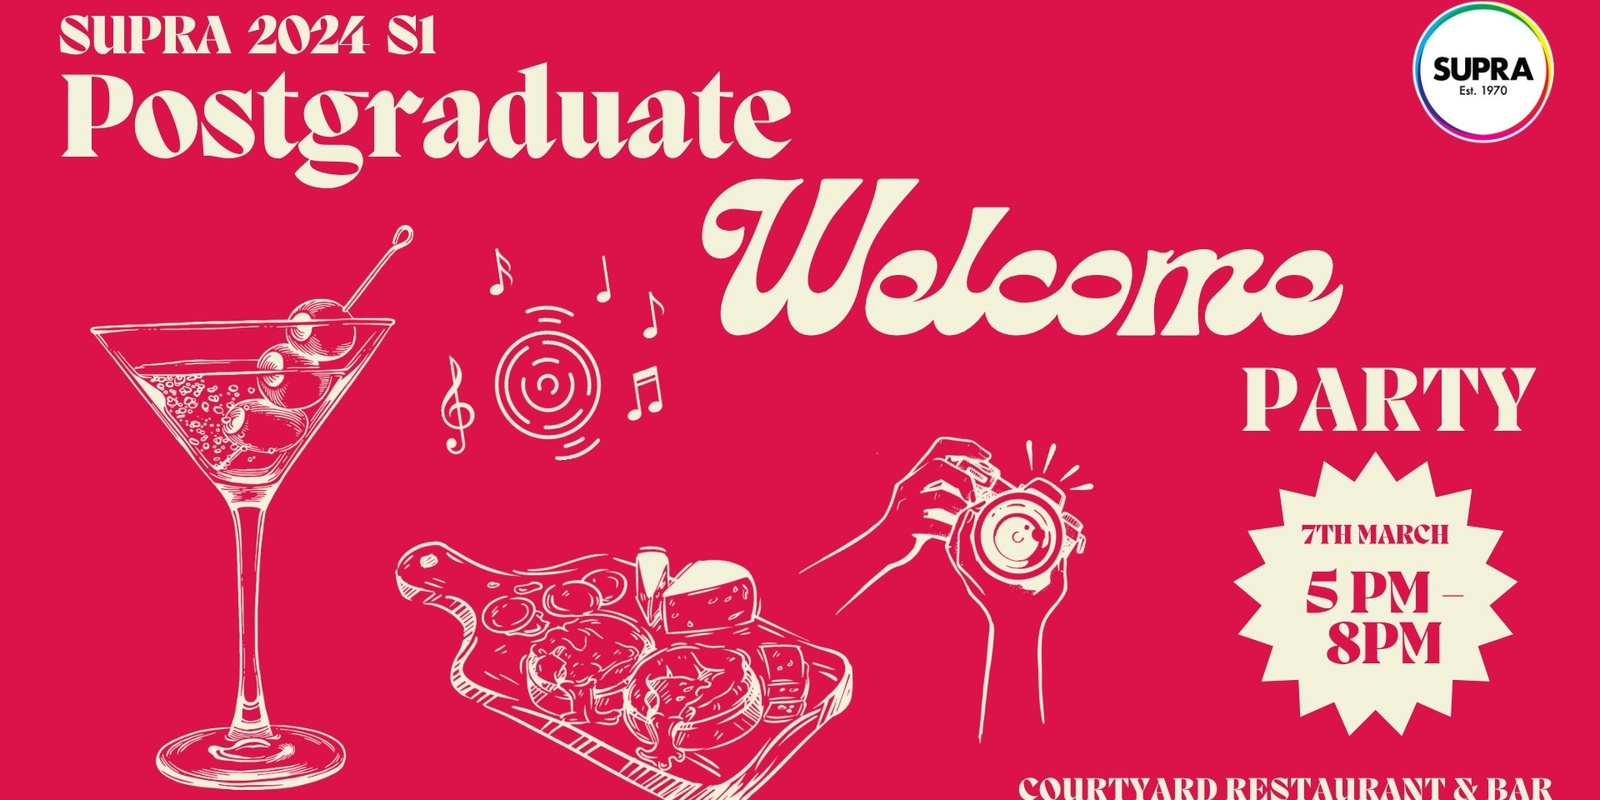 Banner image for SUPRA 2024S1 Postgraduate Welcome Party-GP